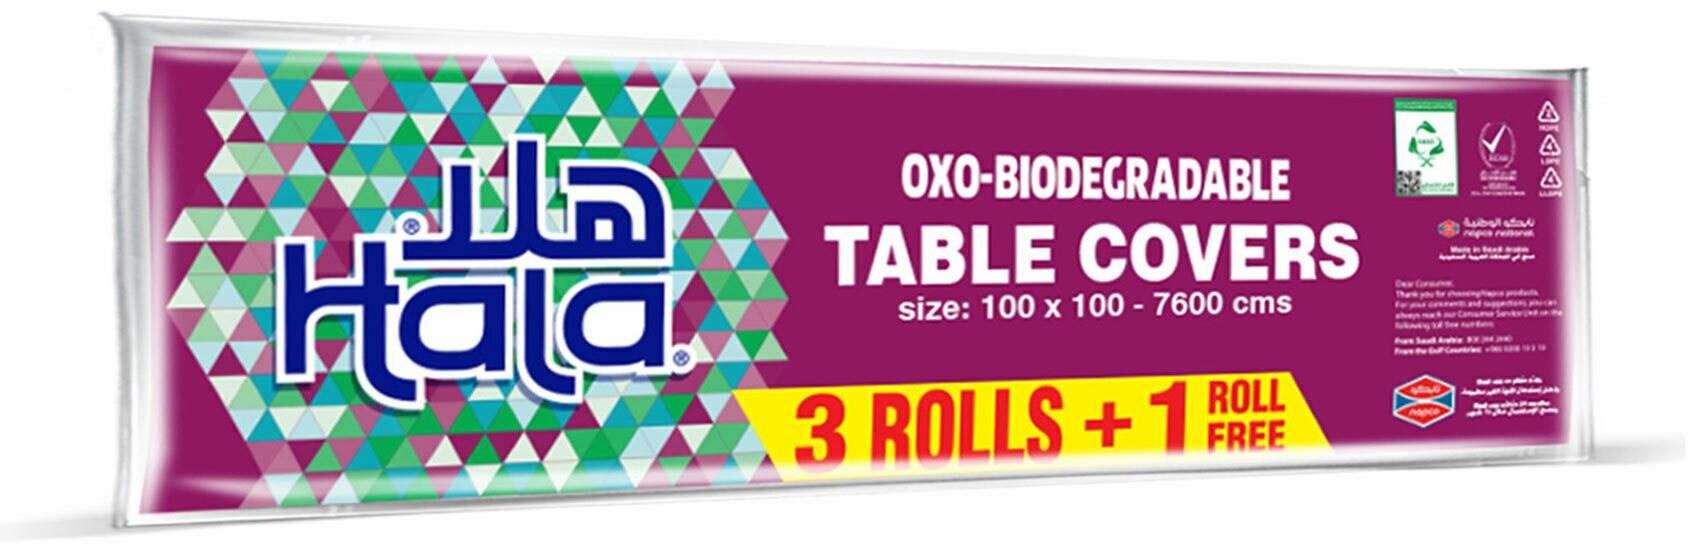 Hala table cover travel pack 3+1 rolls x 76 sheets